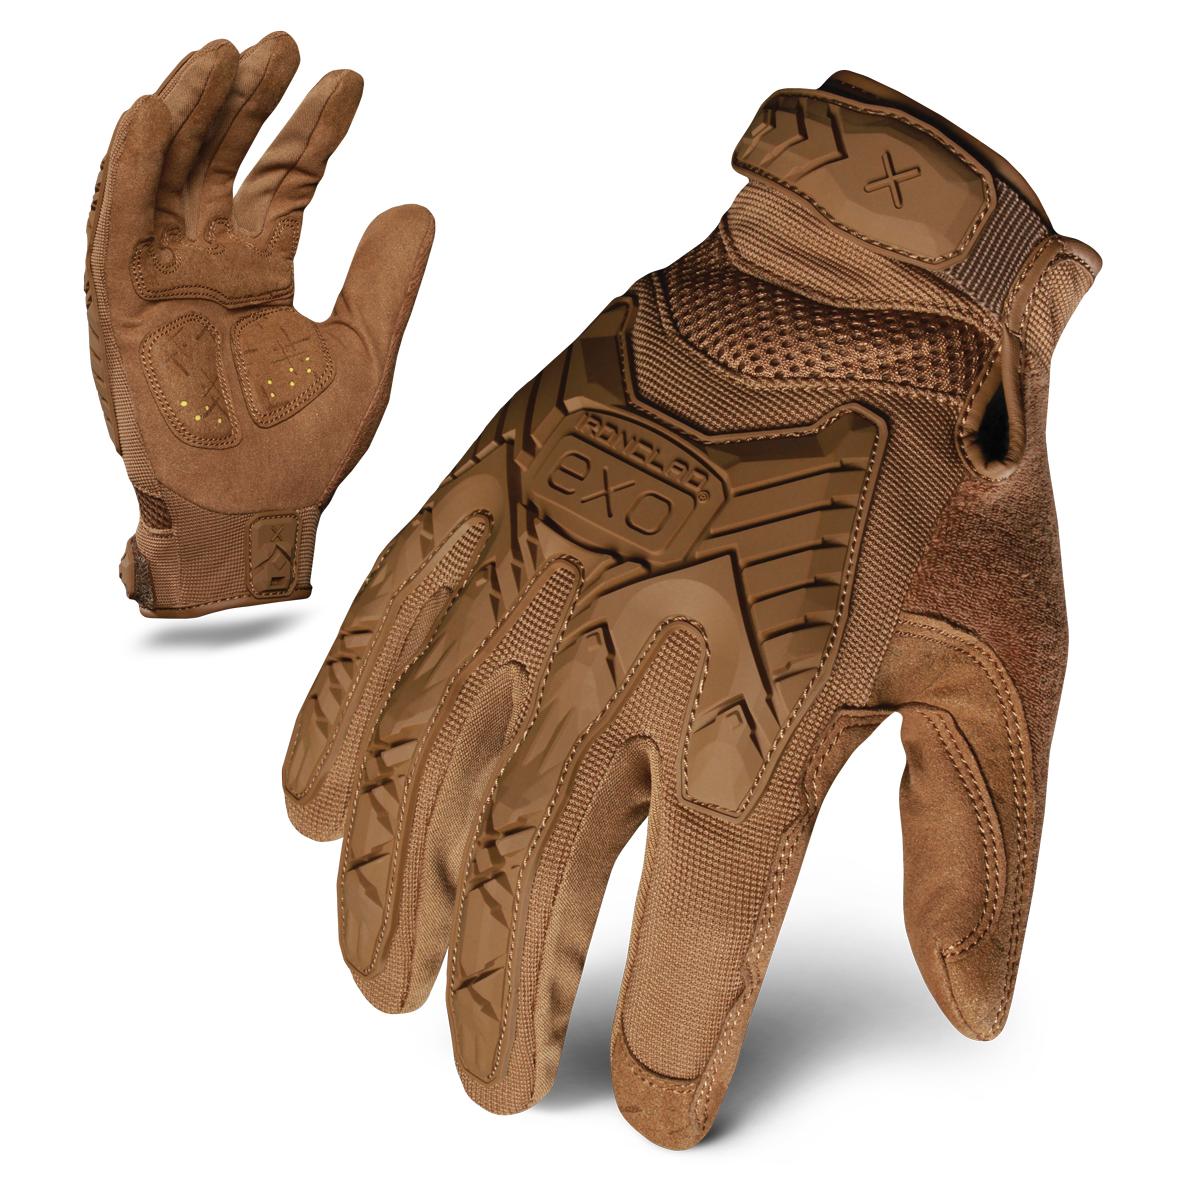 Ironclad EXOT-I Tactical Impact Gloves - Coyote Brown